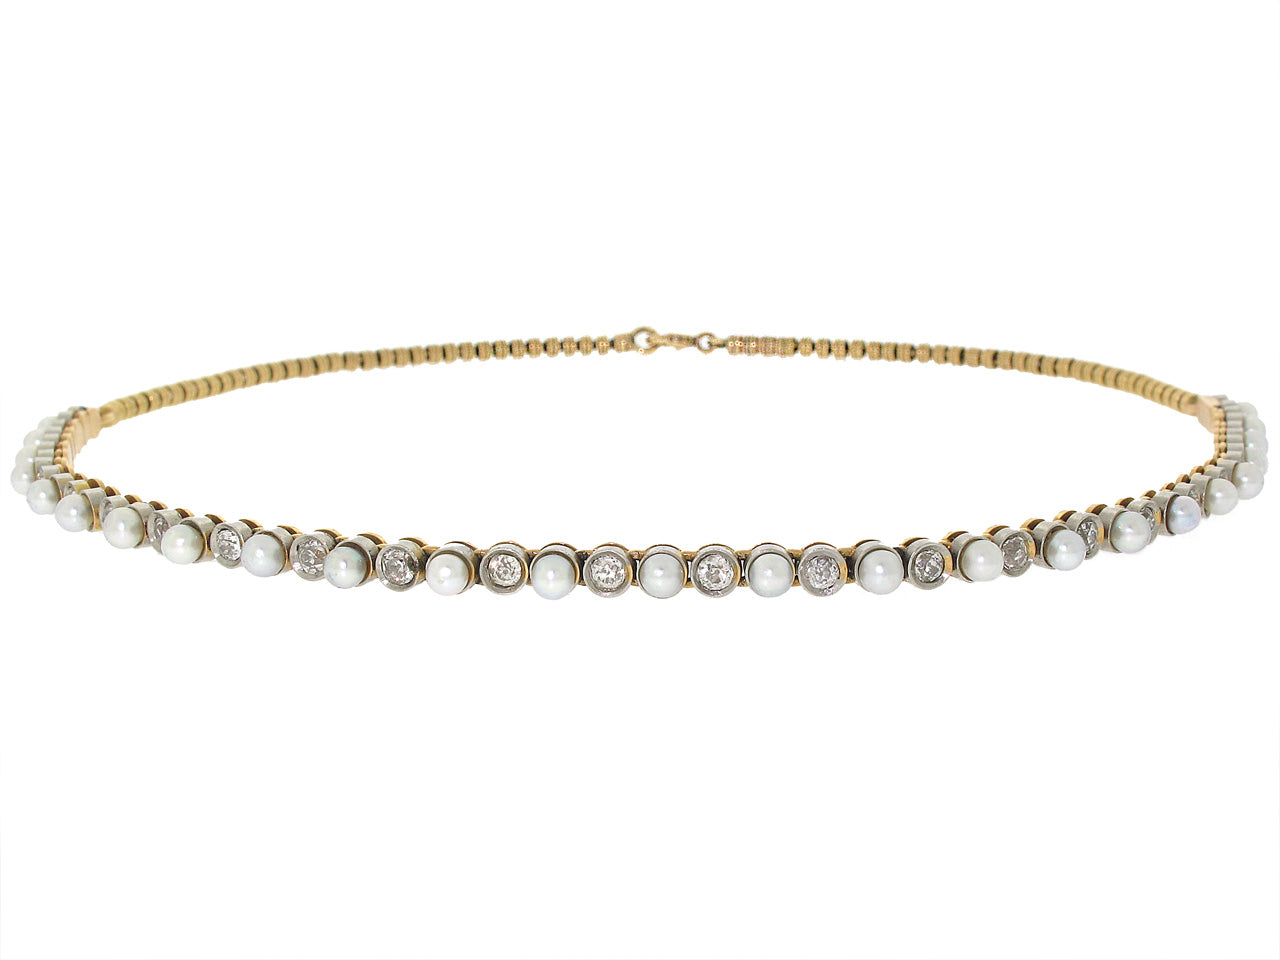 Antique Edwardian Natural Pearl and Diamond Necklace in 14K